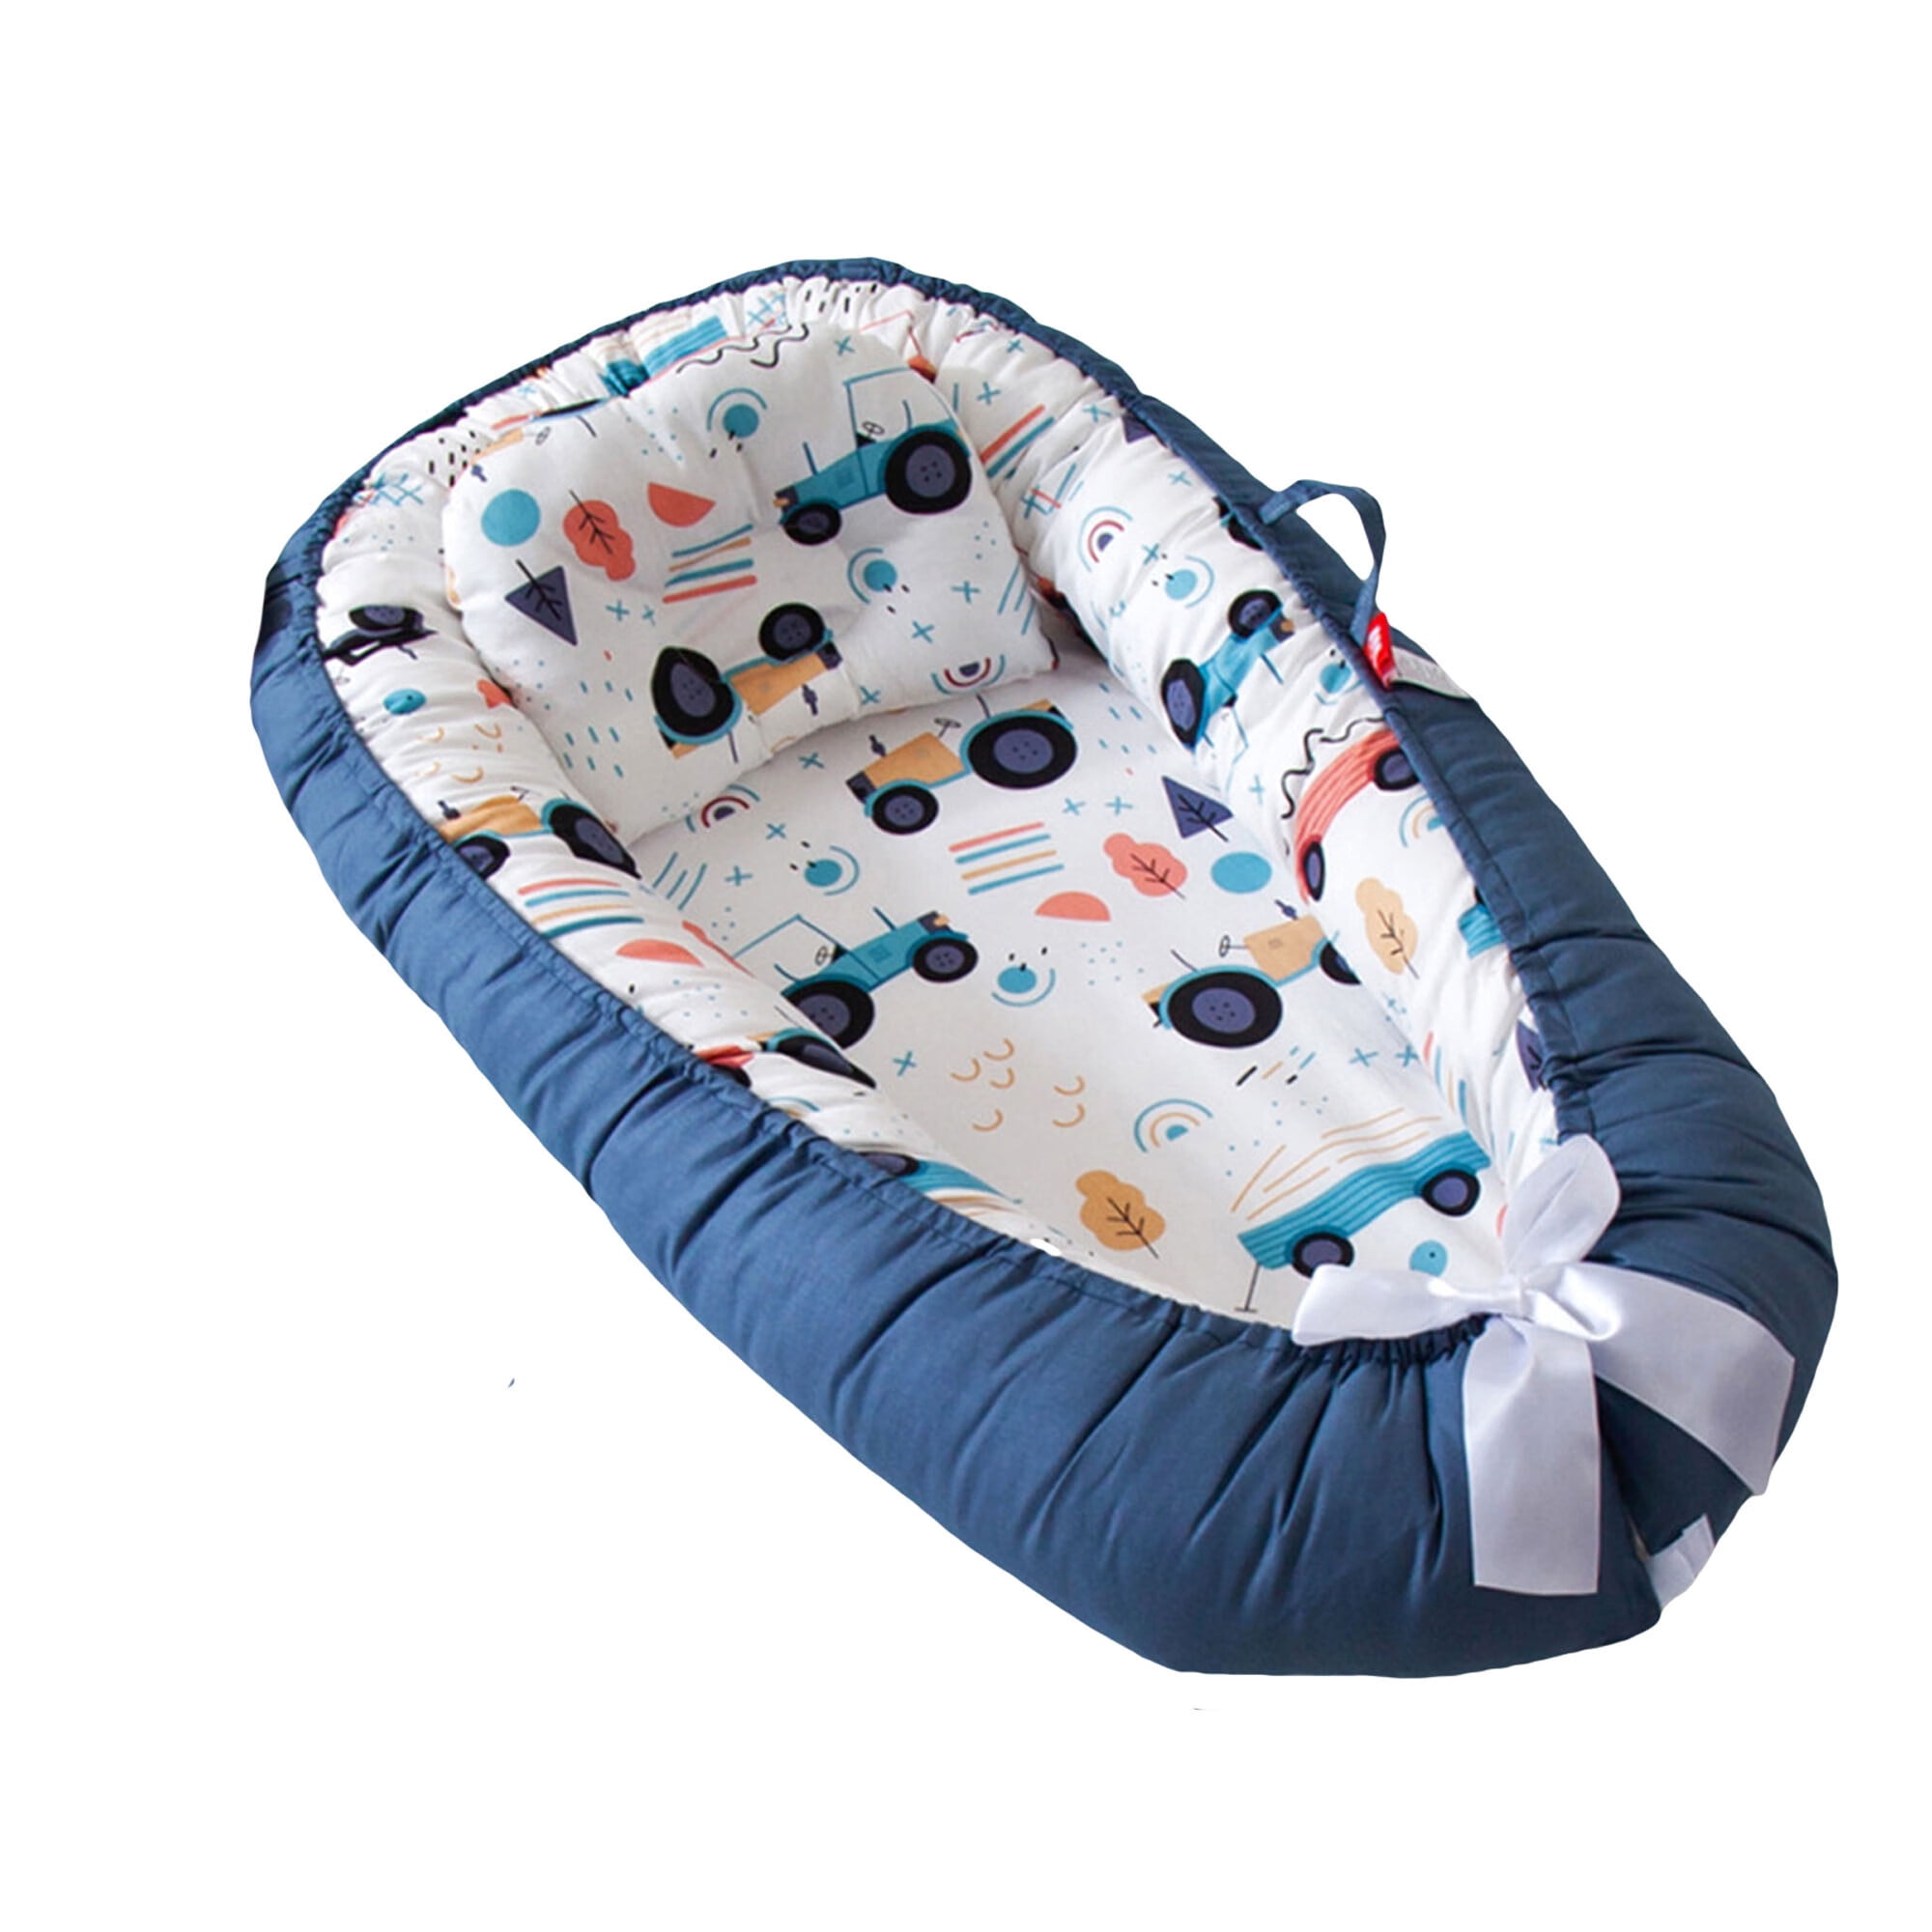 Bebiullo Newborn Baby Lounger Cover Baby Nest for 0-3 Years Baby, Baby ...